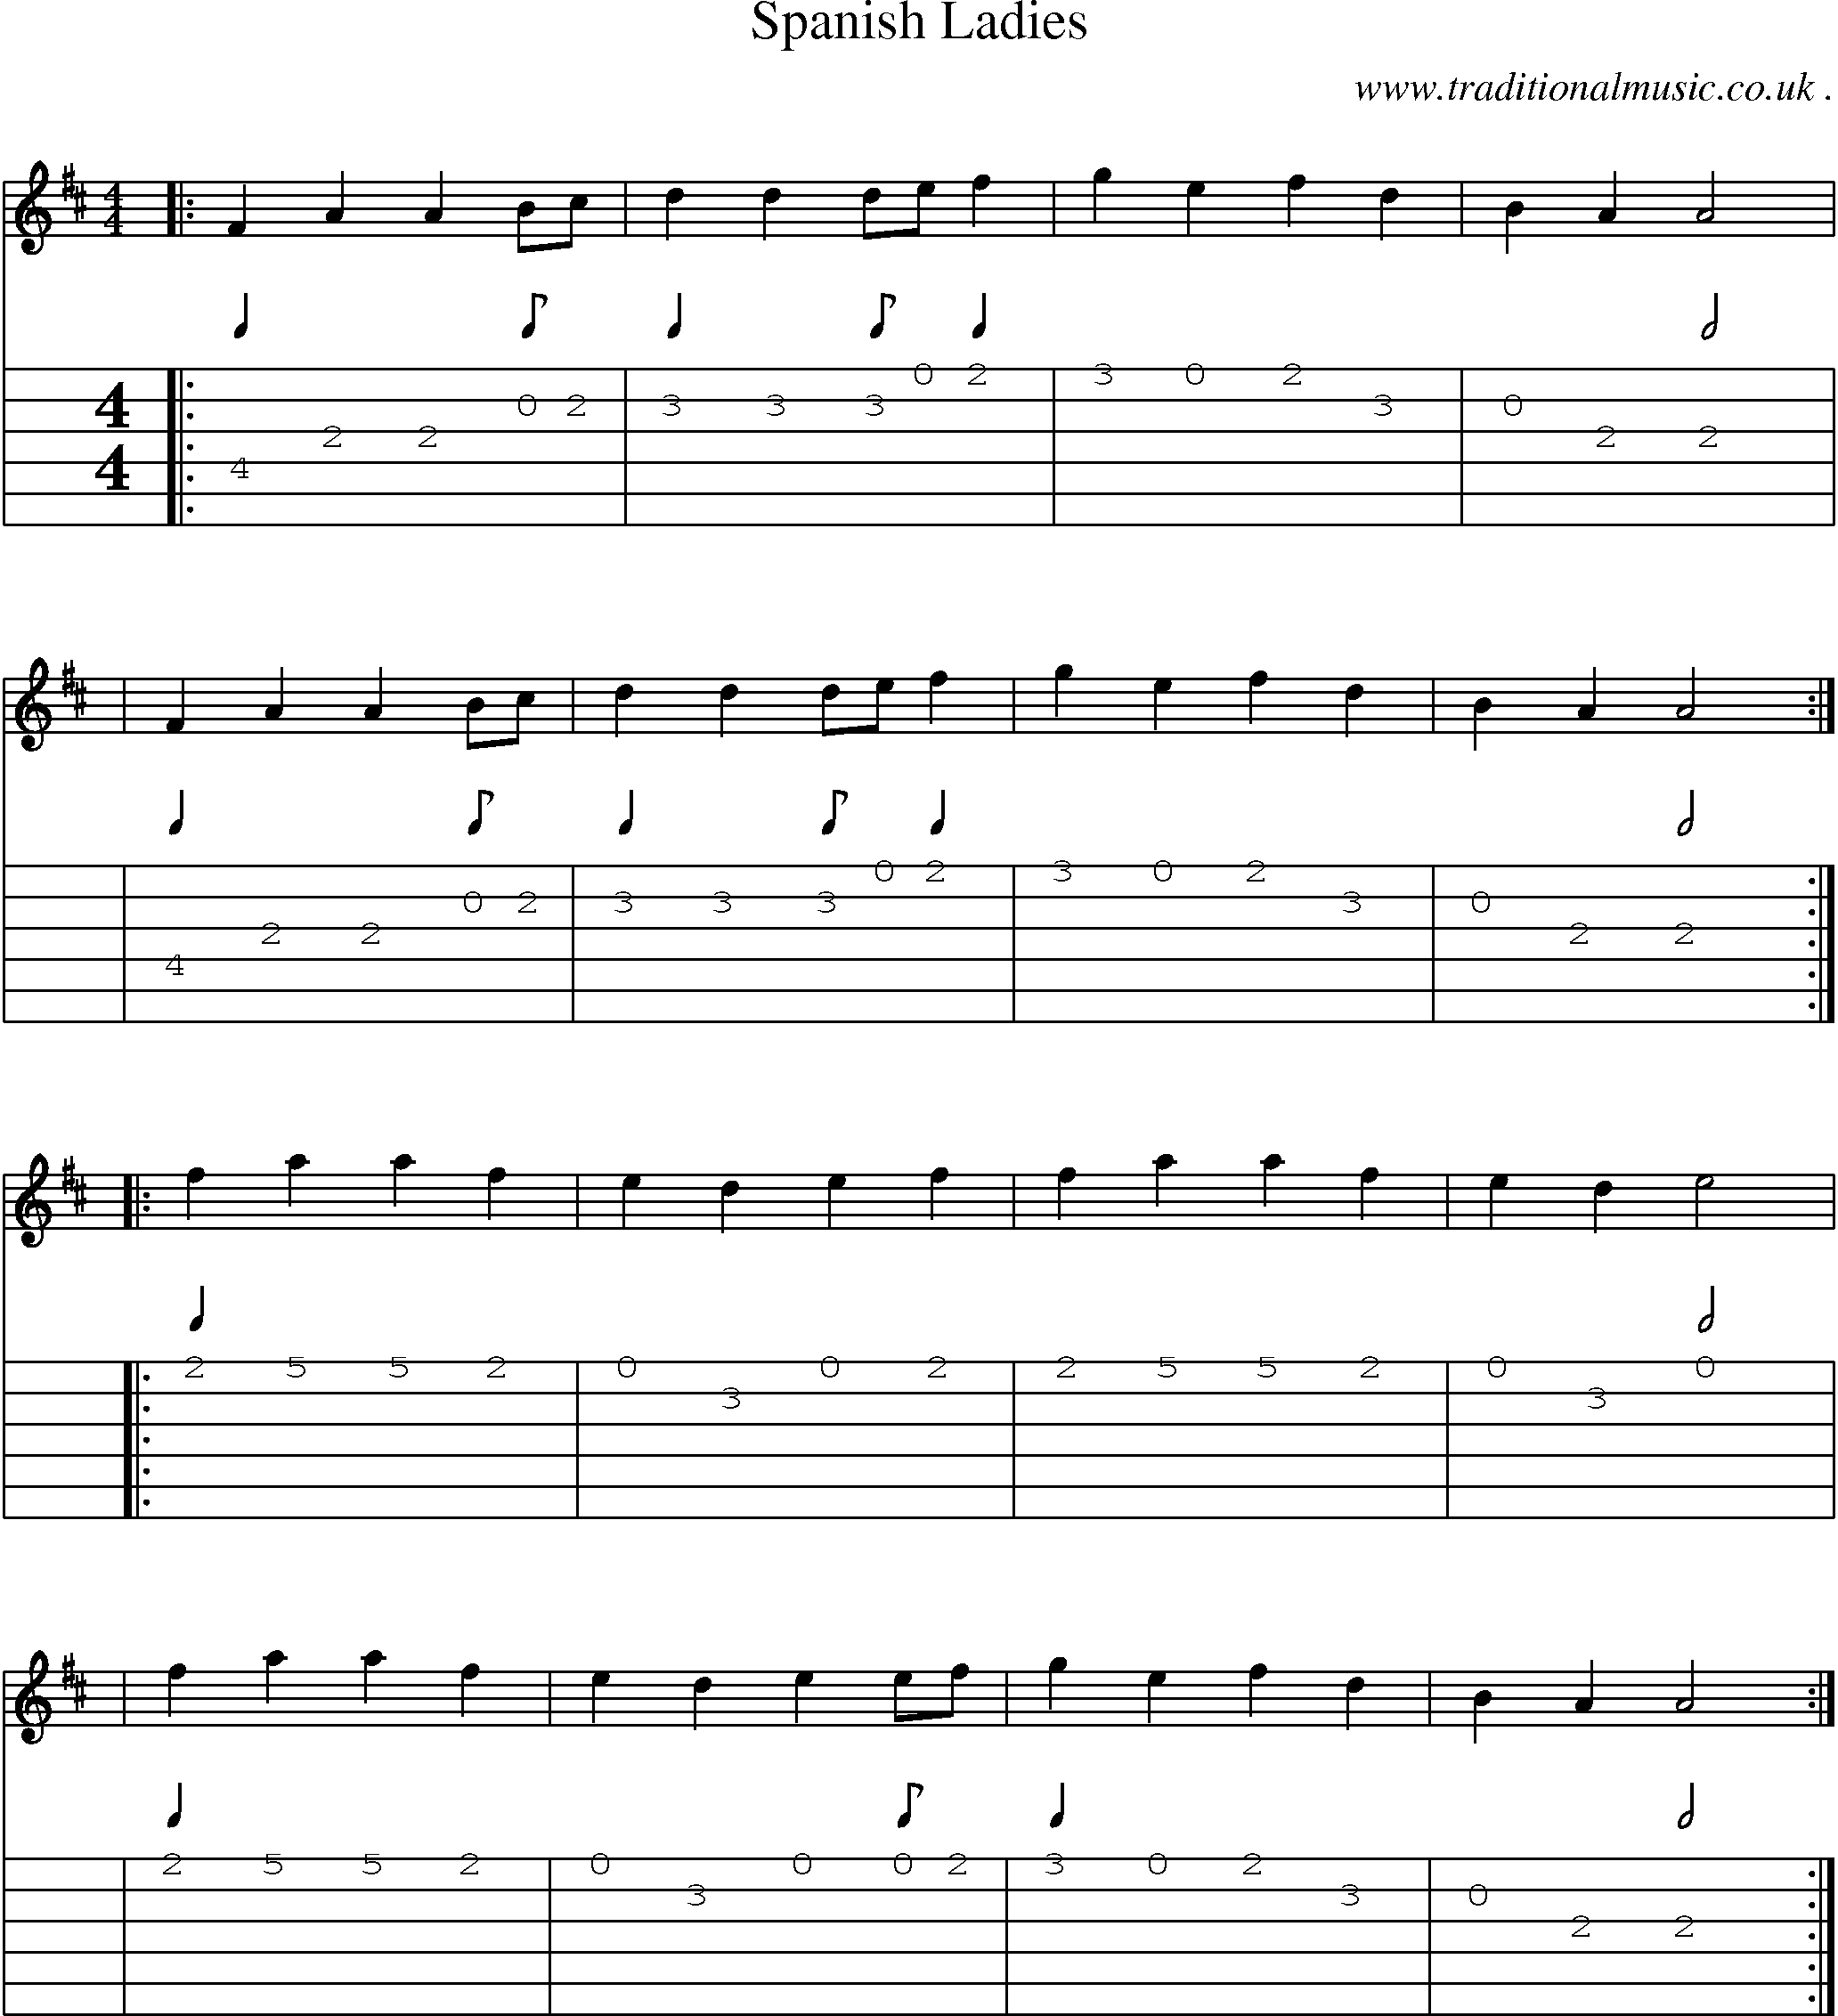 Sheet-Music and Guitar Tabs for Spanish Ladies